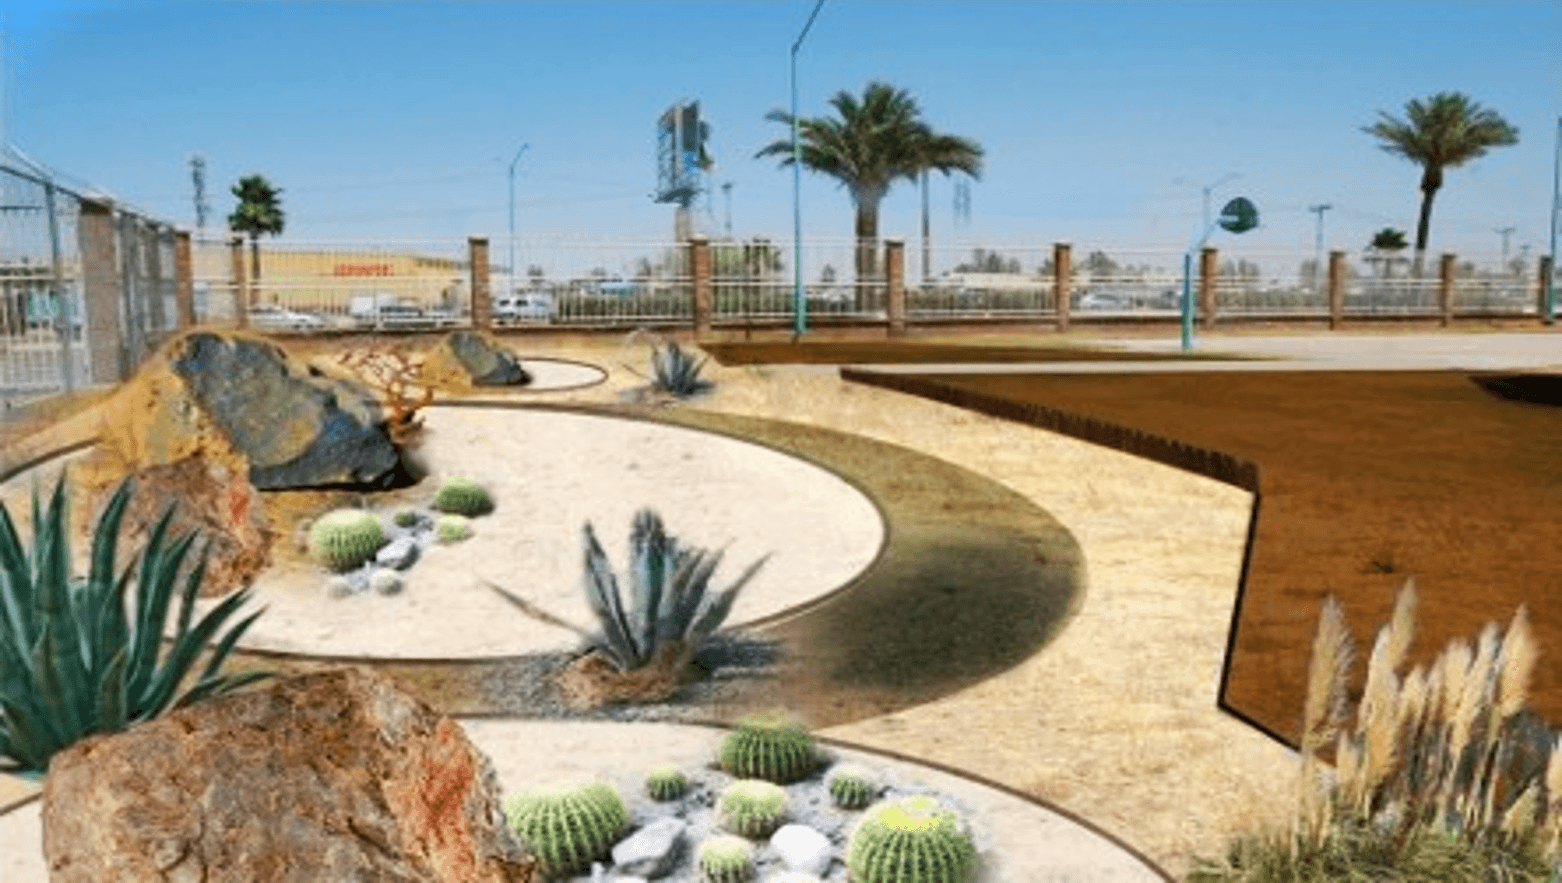 Bosch Mexicali facility reduces water consumption in desert climate - PIMSA INDUSTRIAL PARKS IN MEXICO 2